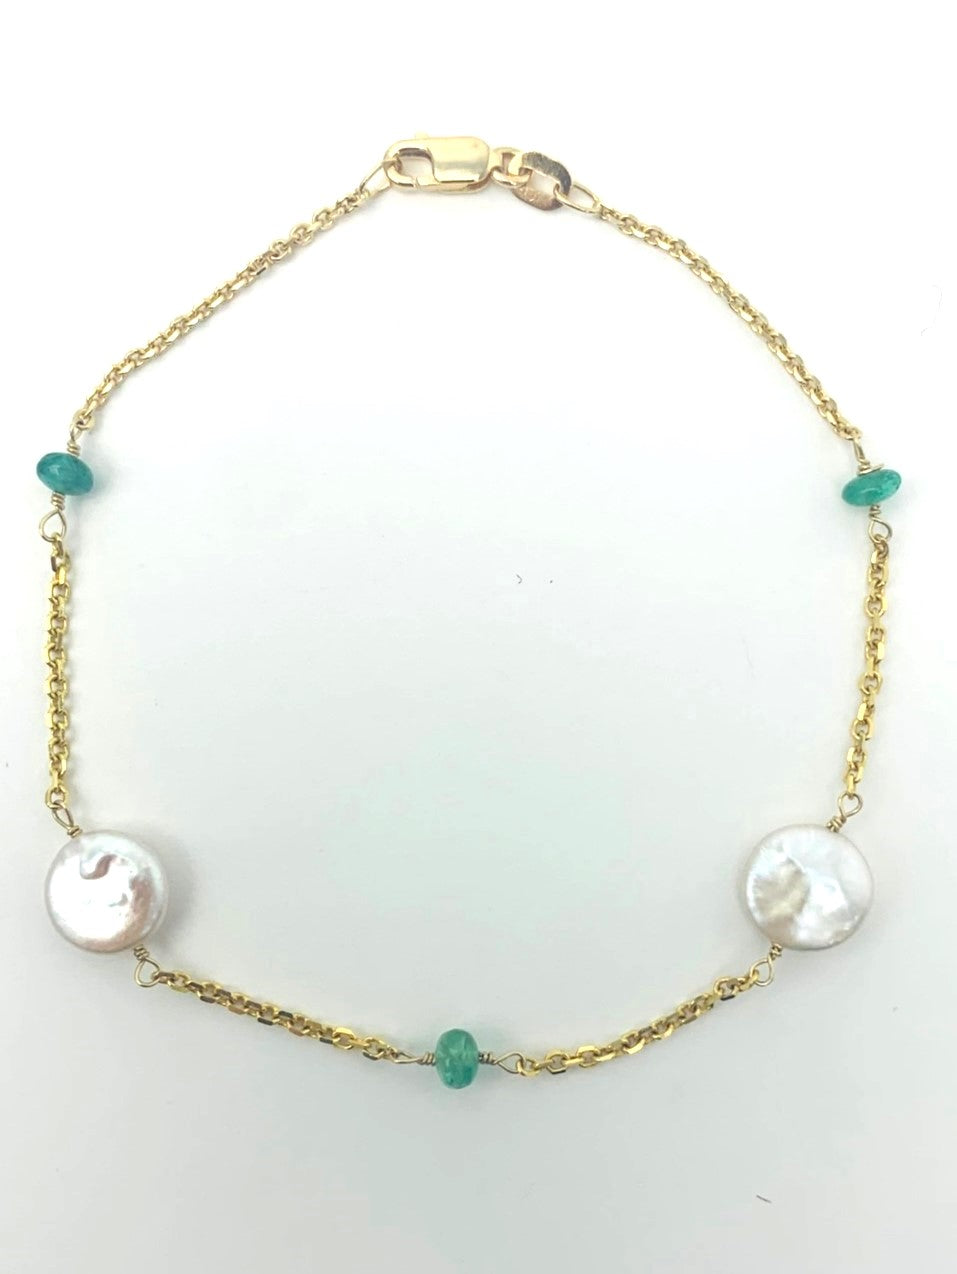 Emerald and Coin Pearl Station Bracelet in 14KY - BRC-008-TNCPRLGM-14Y-WHEM-7.5